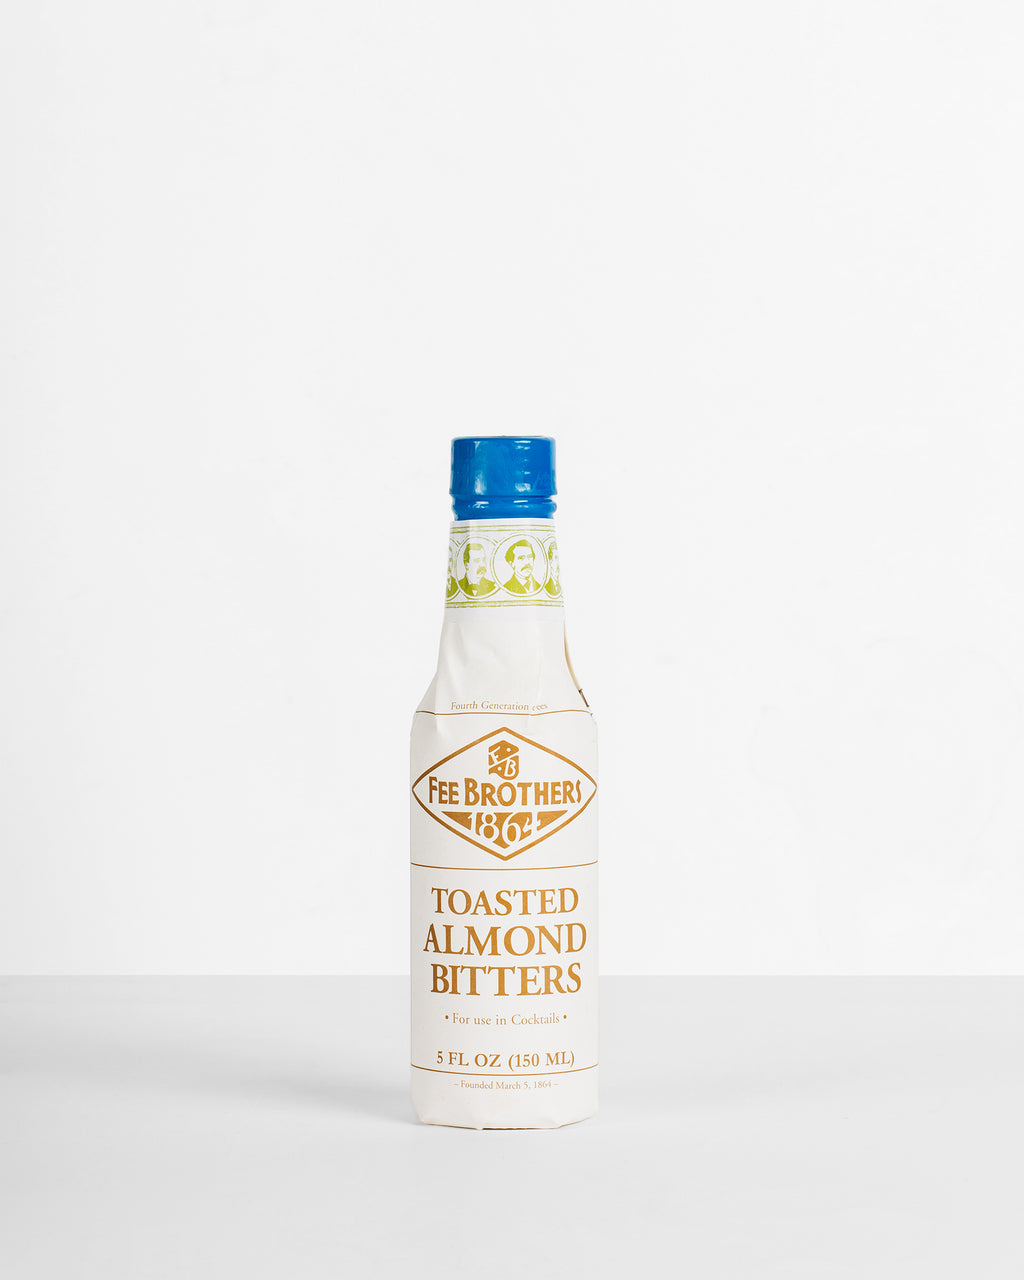 Fee Brother's - Toasted Almond Bitters